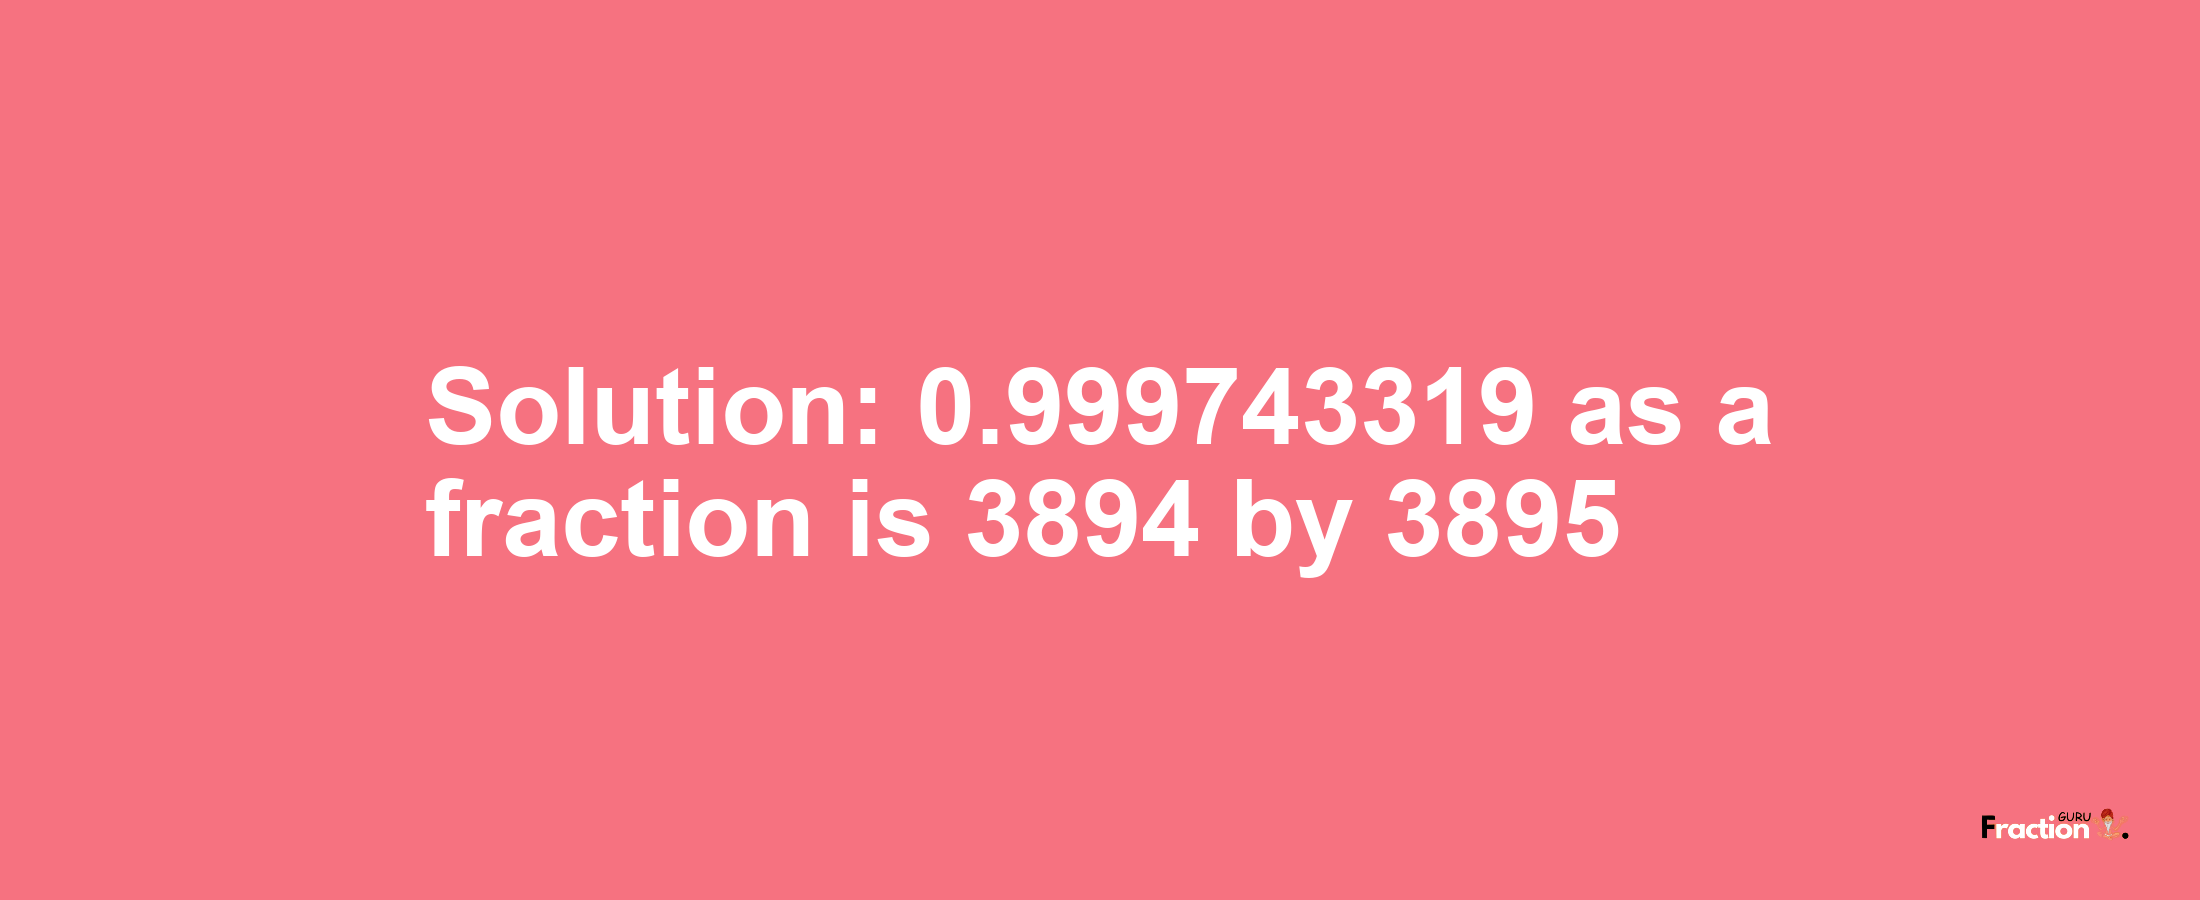 Solution:0.999743319 as a fraction is 3894/3895